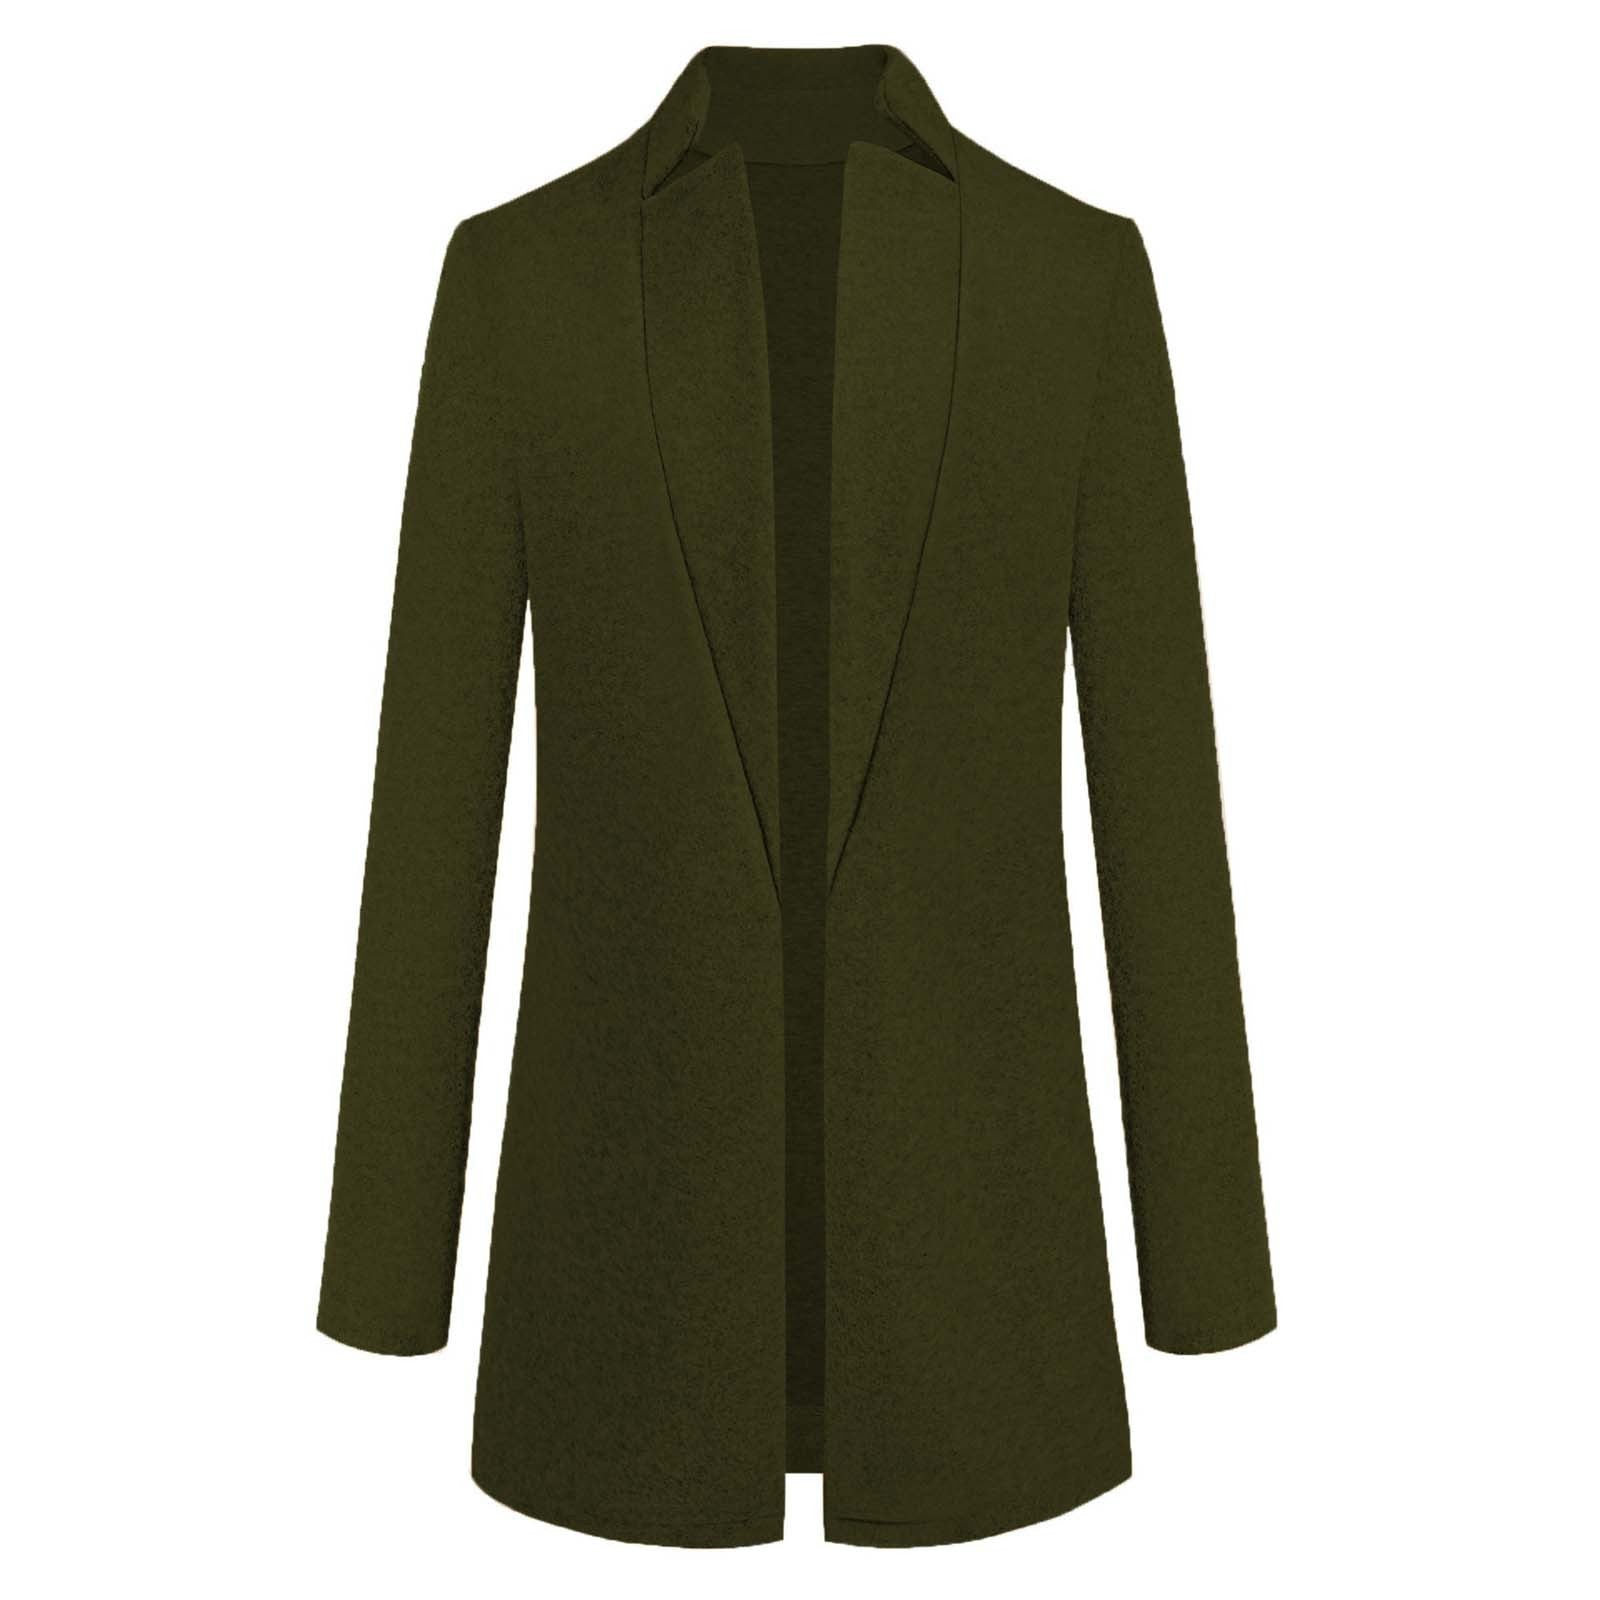 Women's Fashion Solid Long Sleeve Jacket Stand-up Collar Faux Wool Winter Coat - Nowena Store